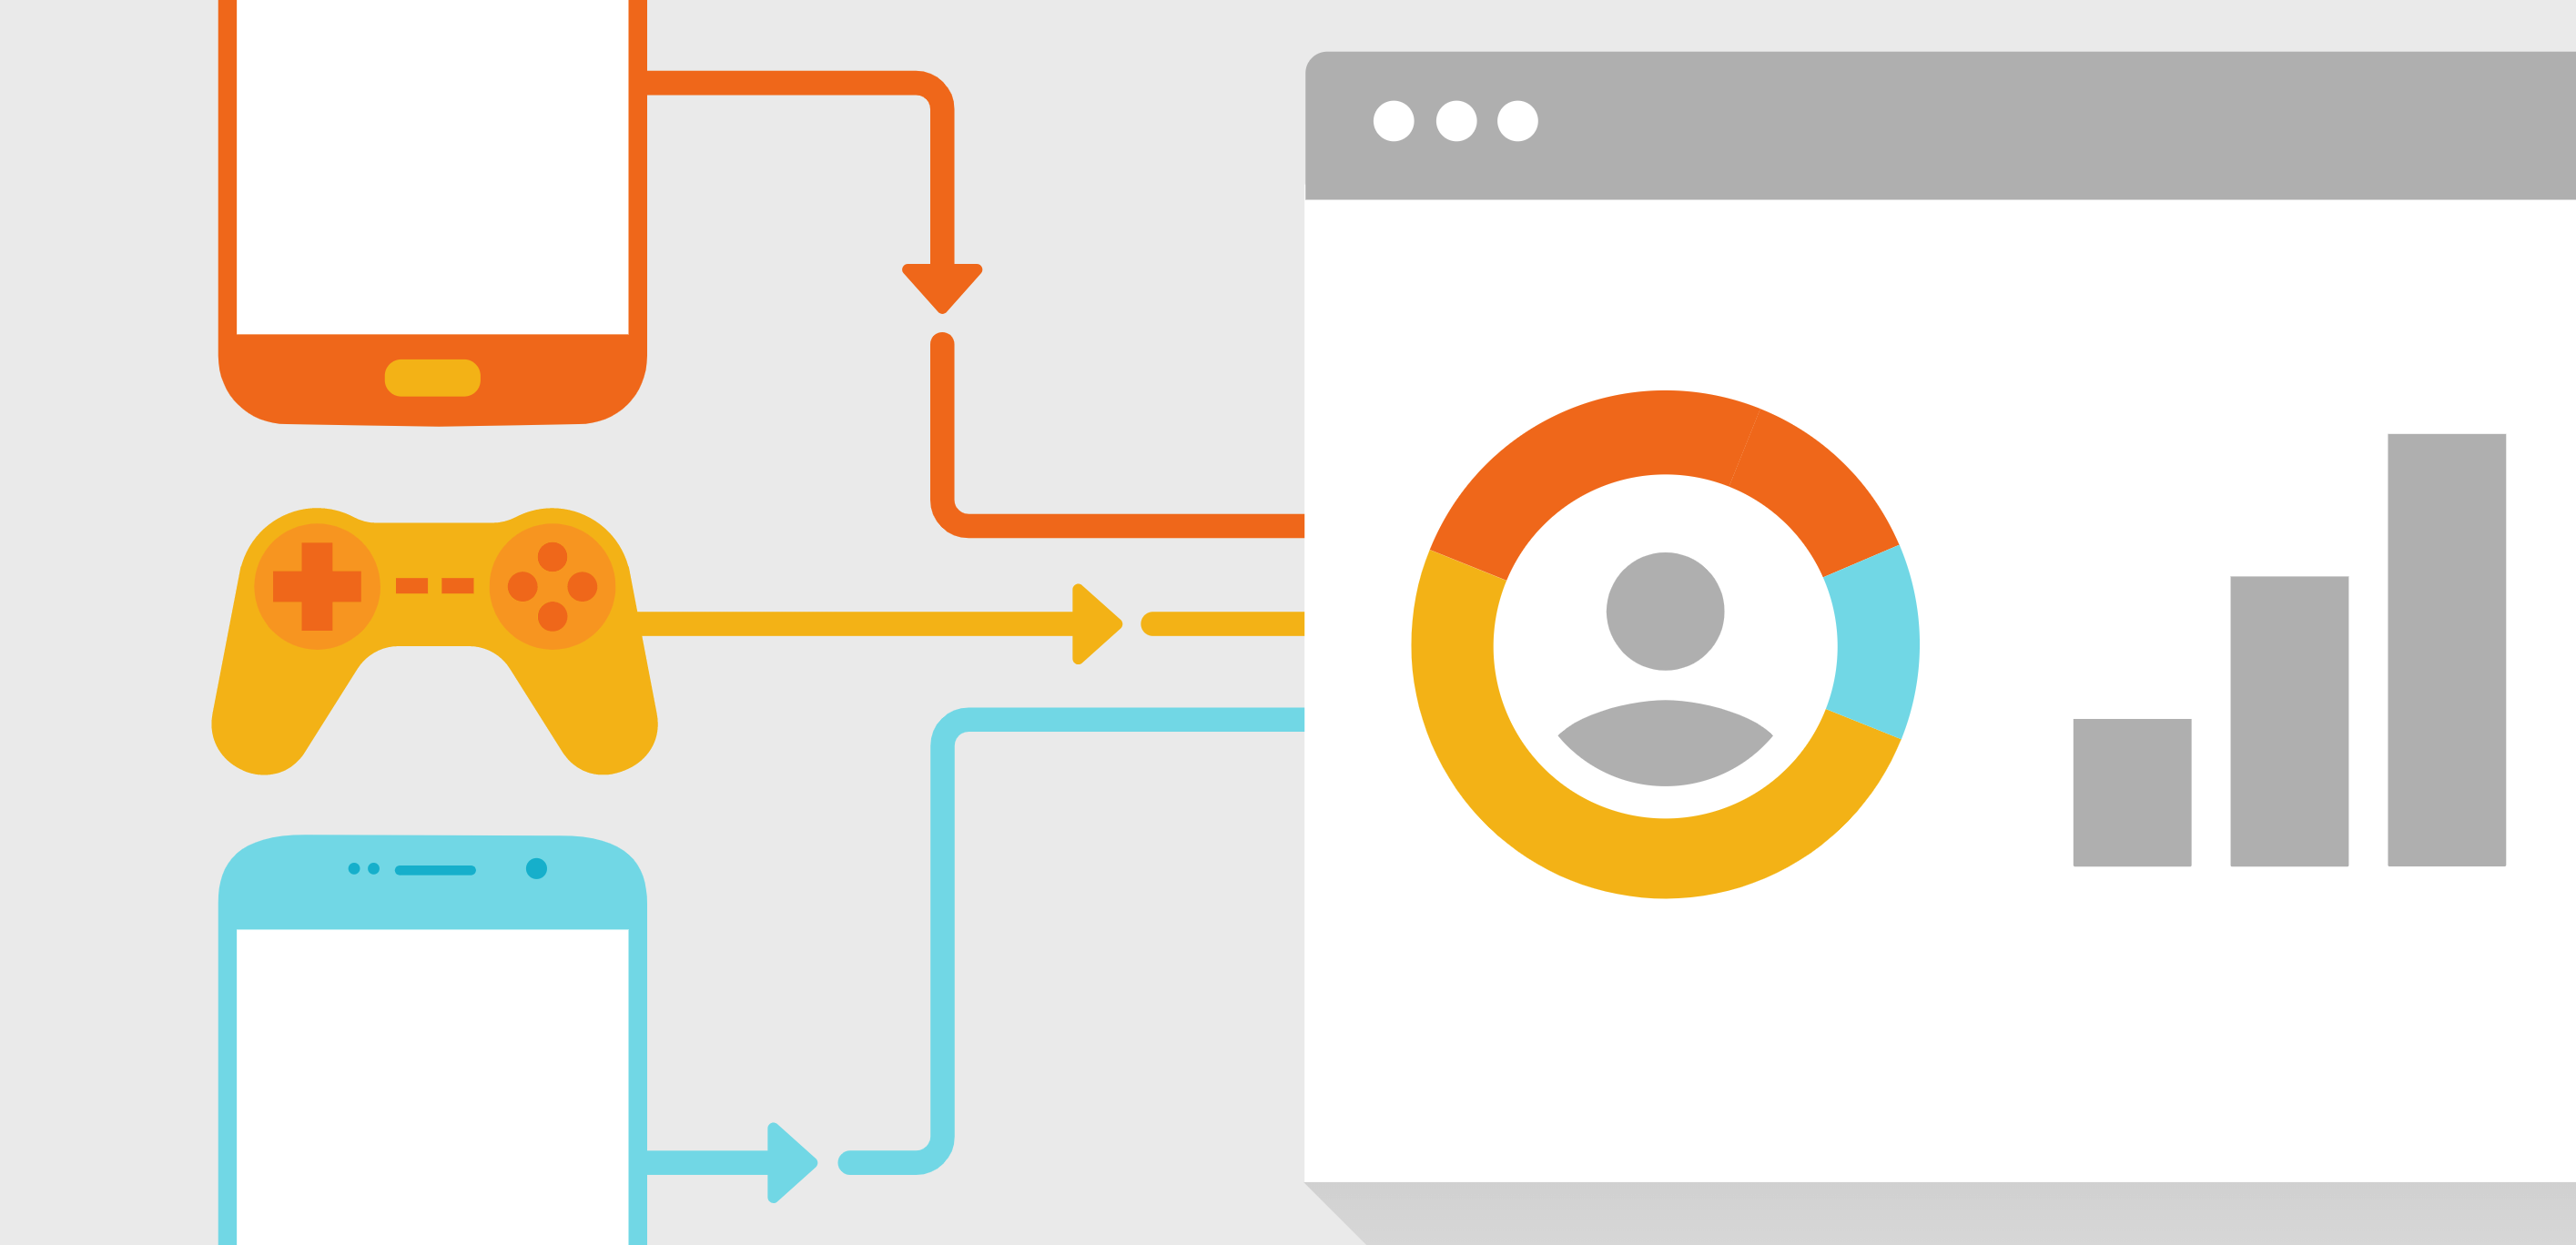 Google Analytics lets you measure user interaction with websites or web apps.